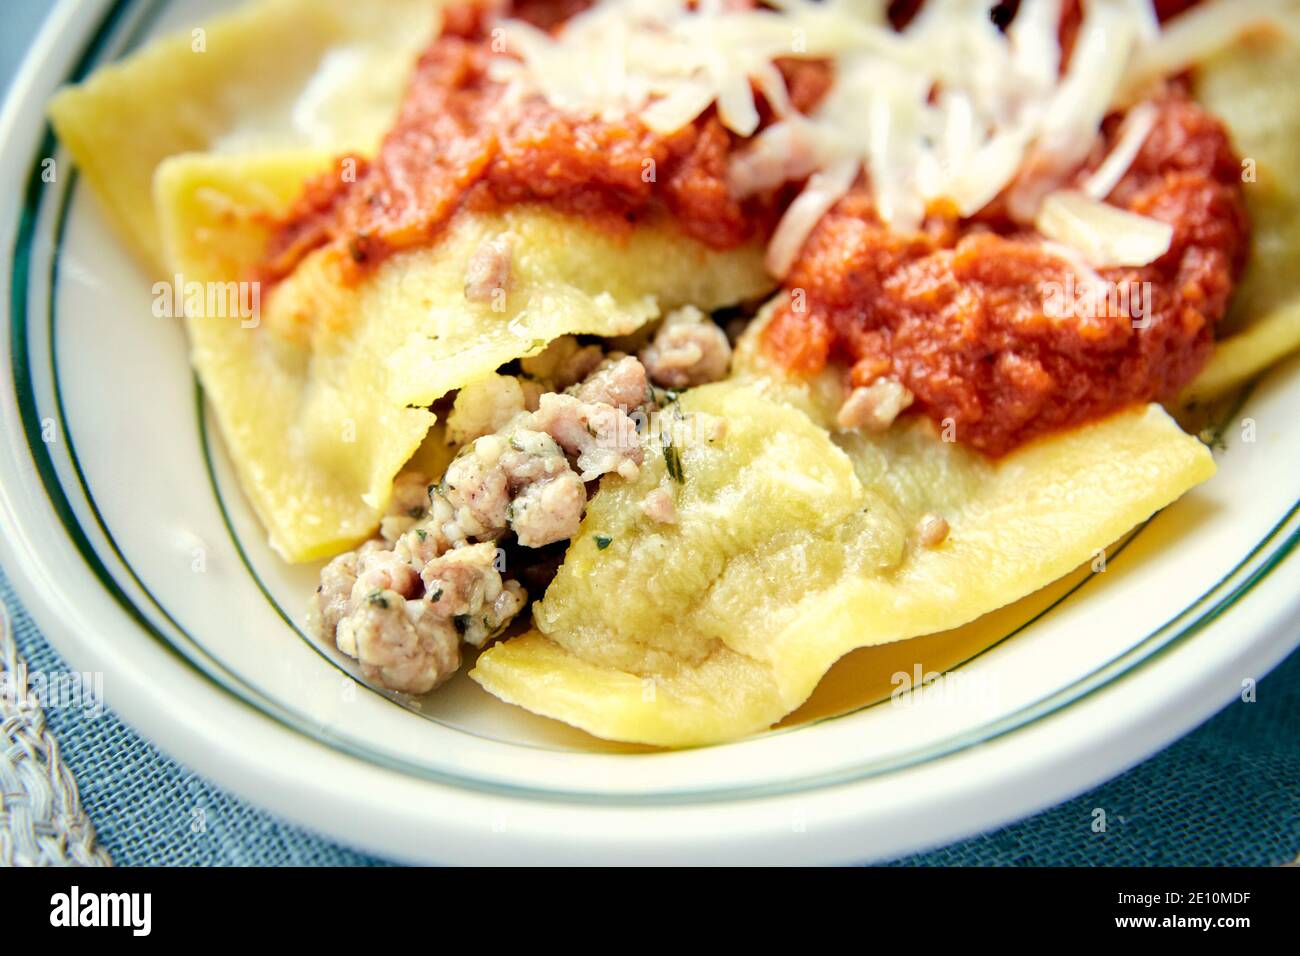 Ravioli with Meat Sauce and Grated Cheese, Closeup on White Plate Stock Photo